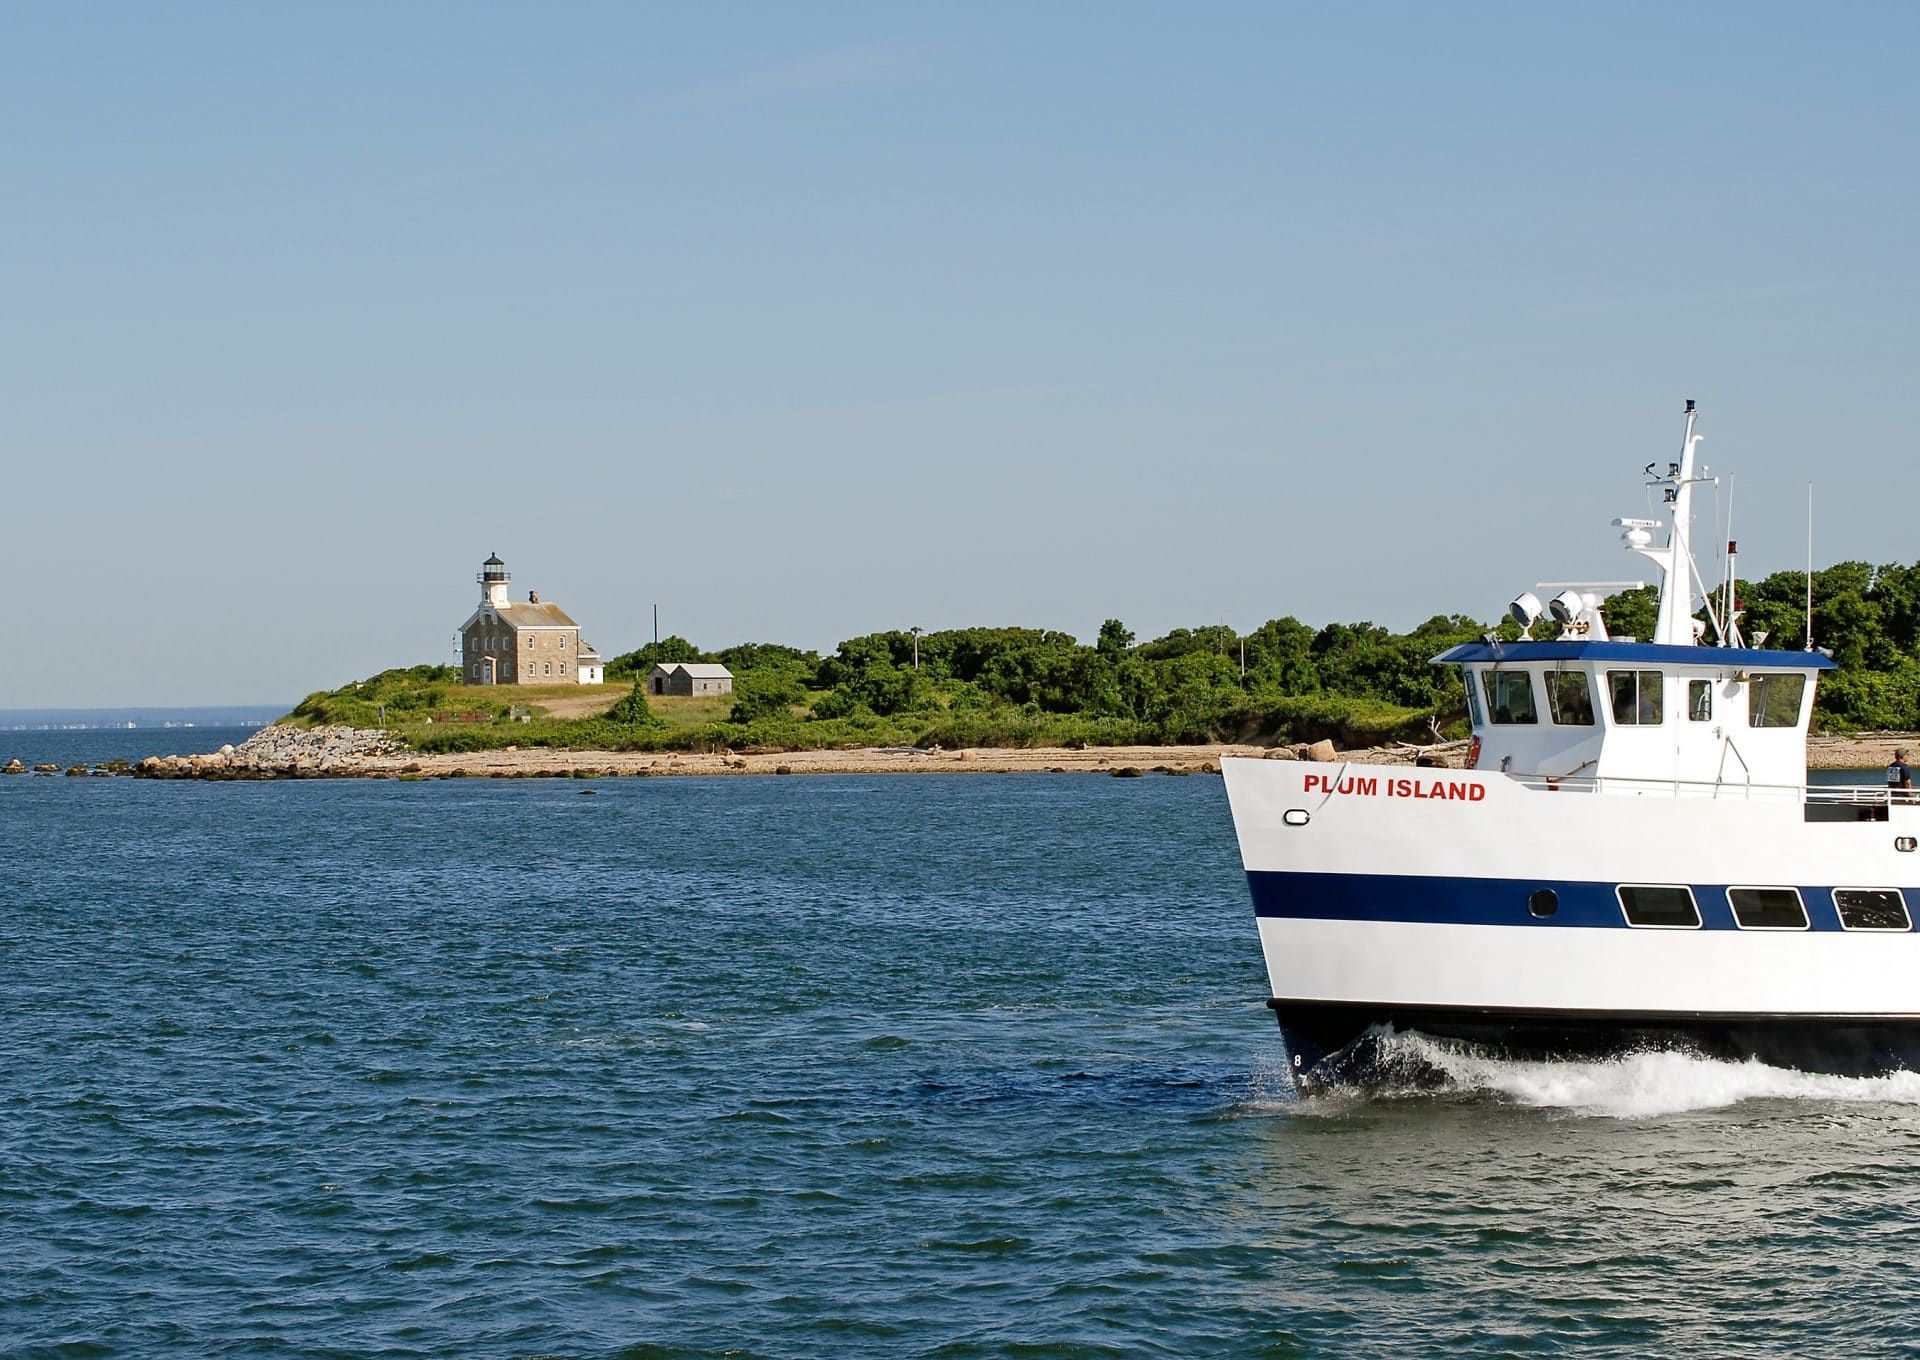 Ferries bring researchers and staff to and from Plum Island several times each day. Photo by <a href="https://www.ars.usda.gov/oc/images/photos/oct13/d2996-1/">USDA</a> / Kathleen Apicelli